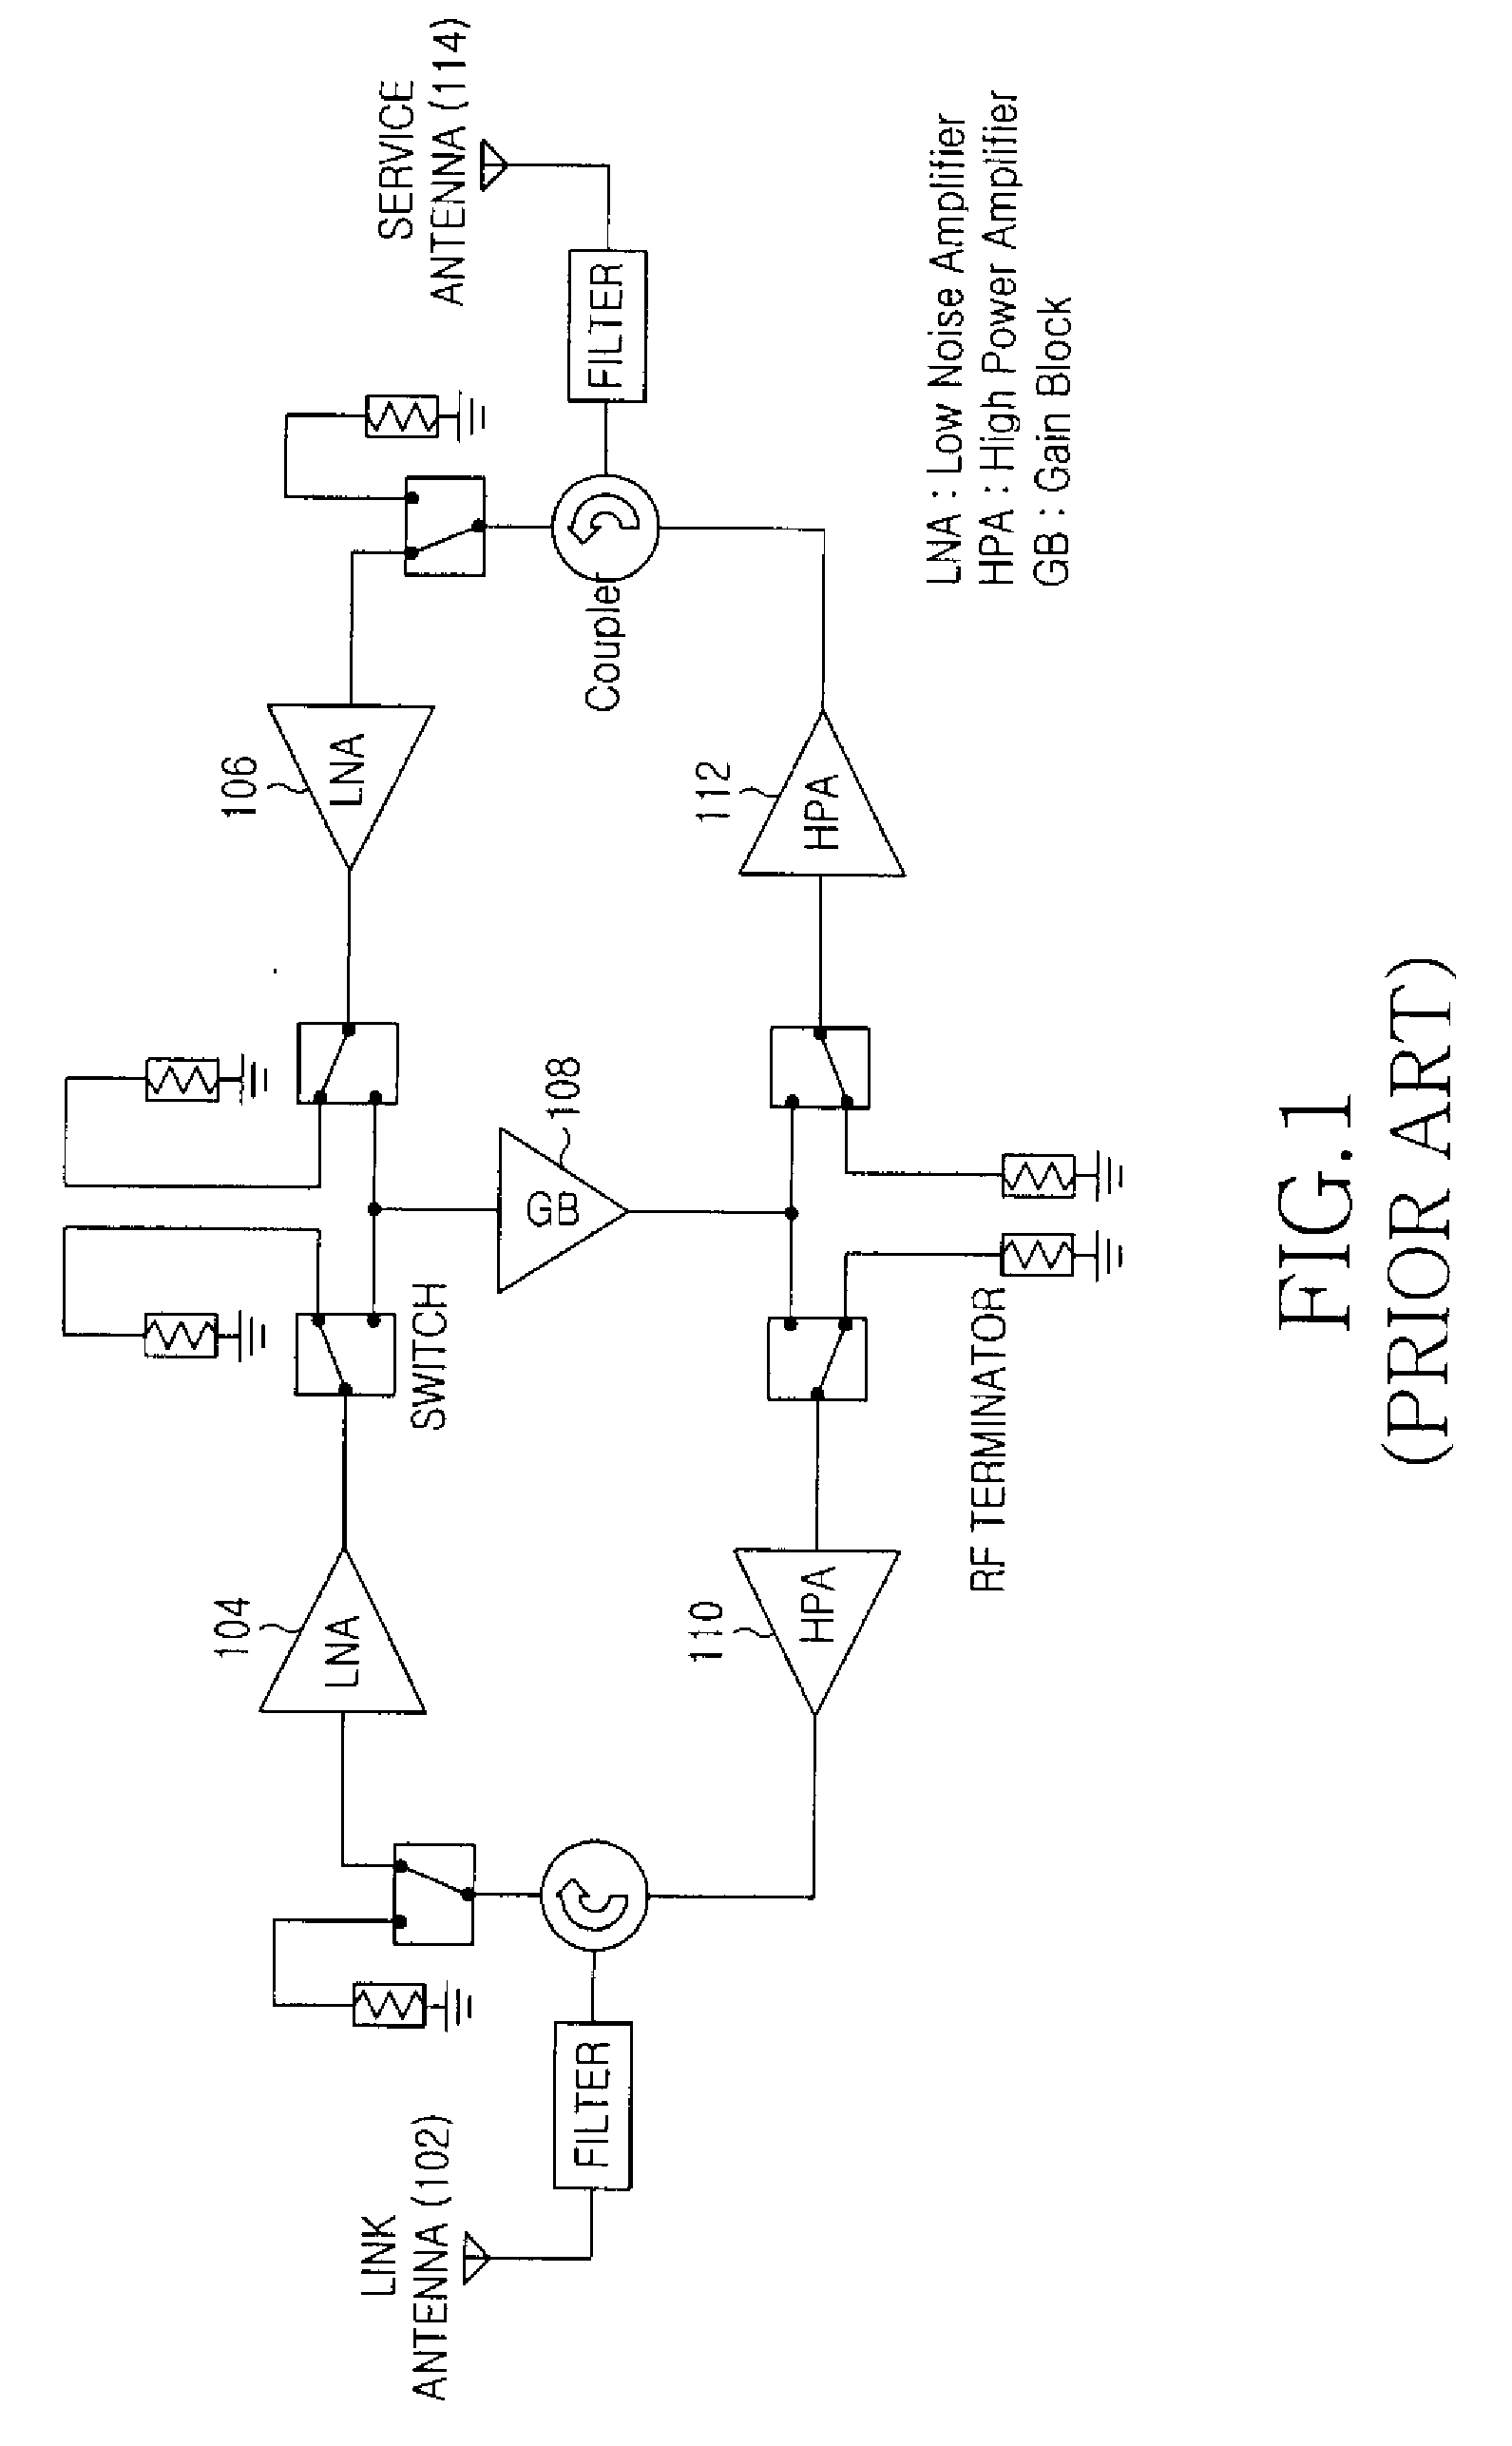 Time division duplexing remote station having low-noise amplifier shared for uplink and downlink operations and wired relay method using the same